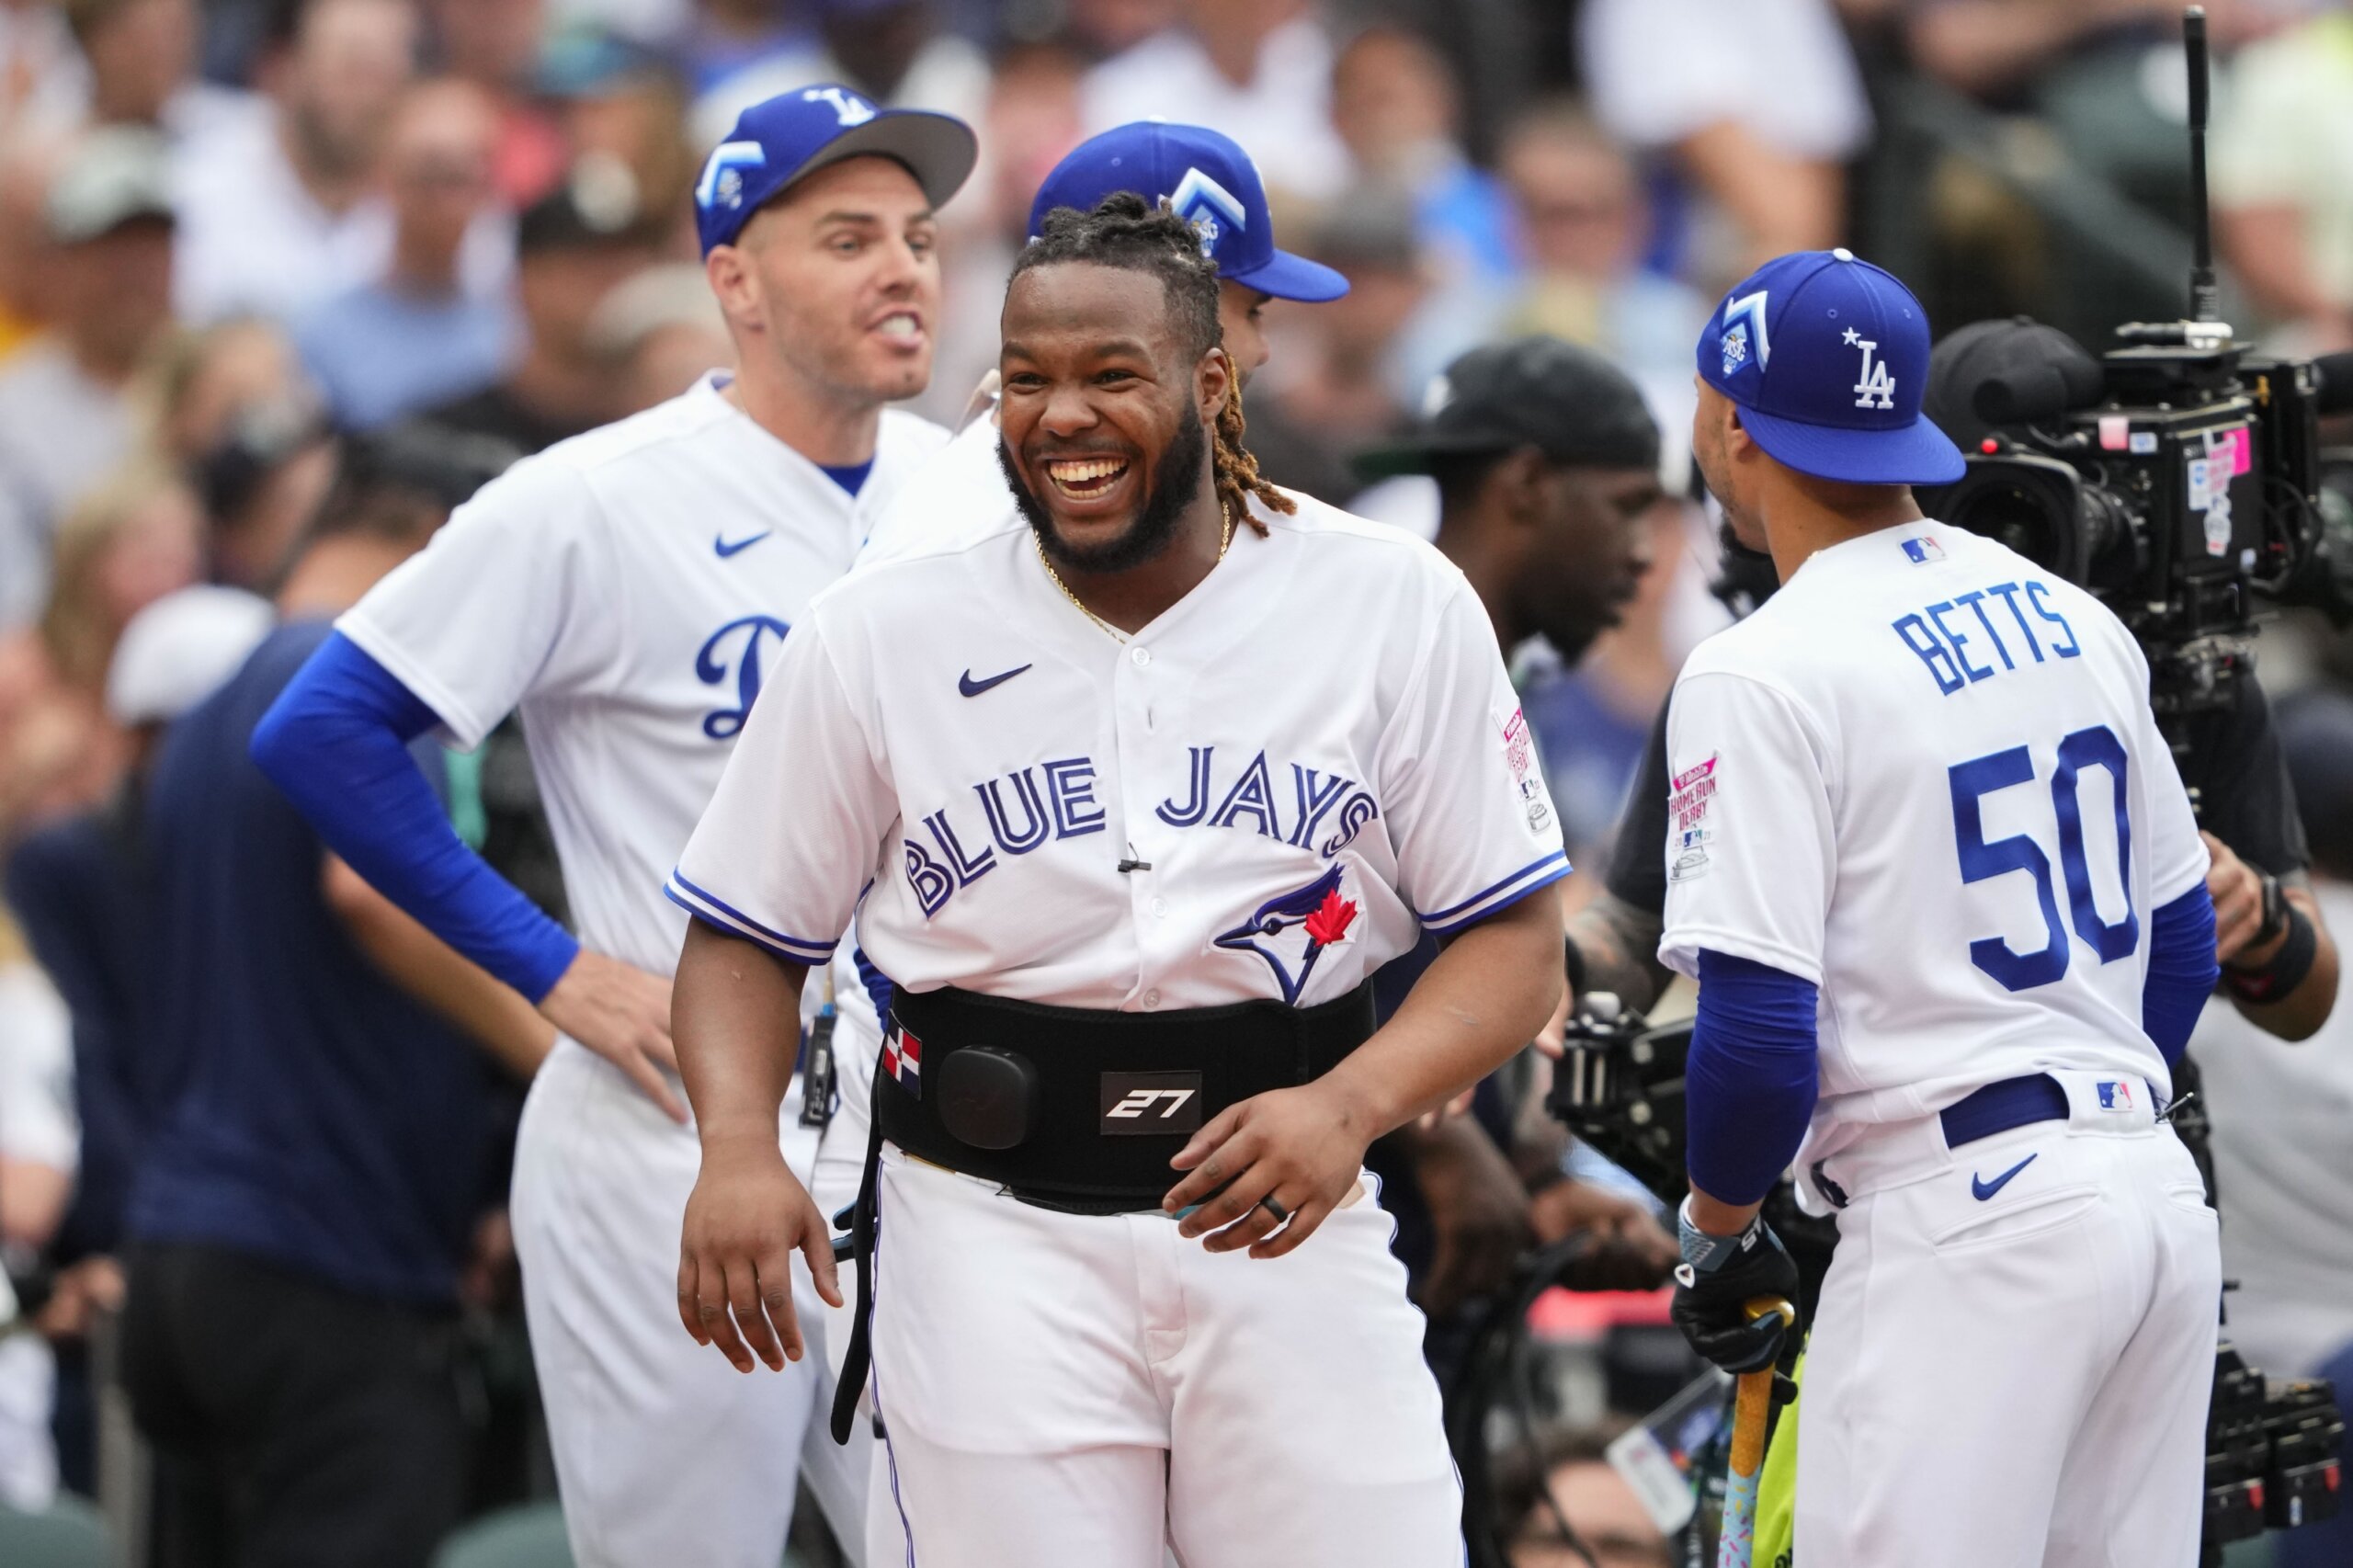 Blue Jays' Vladimir Guerrero Jr. on a 'mission' to beat Yankees